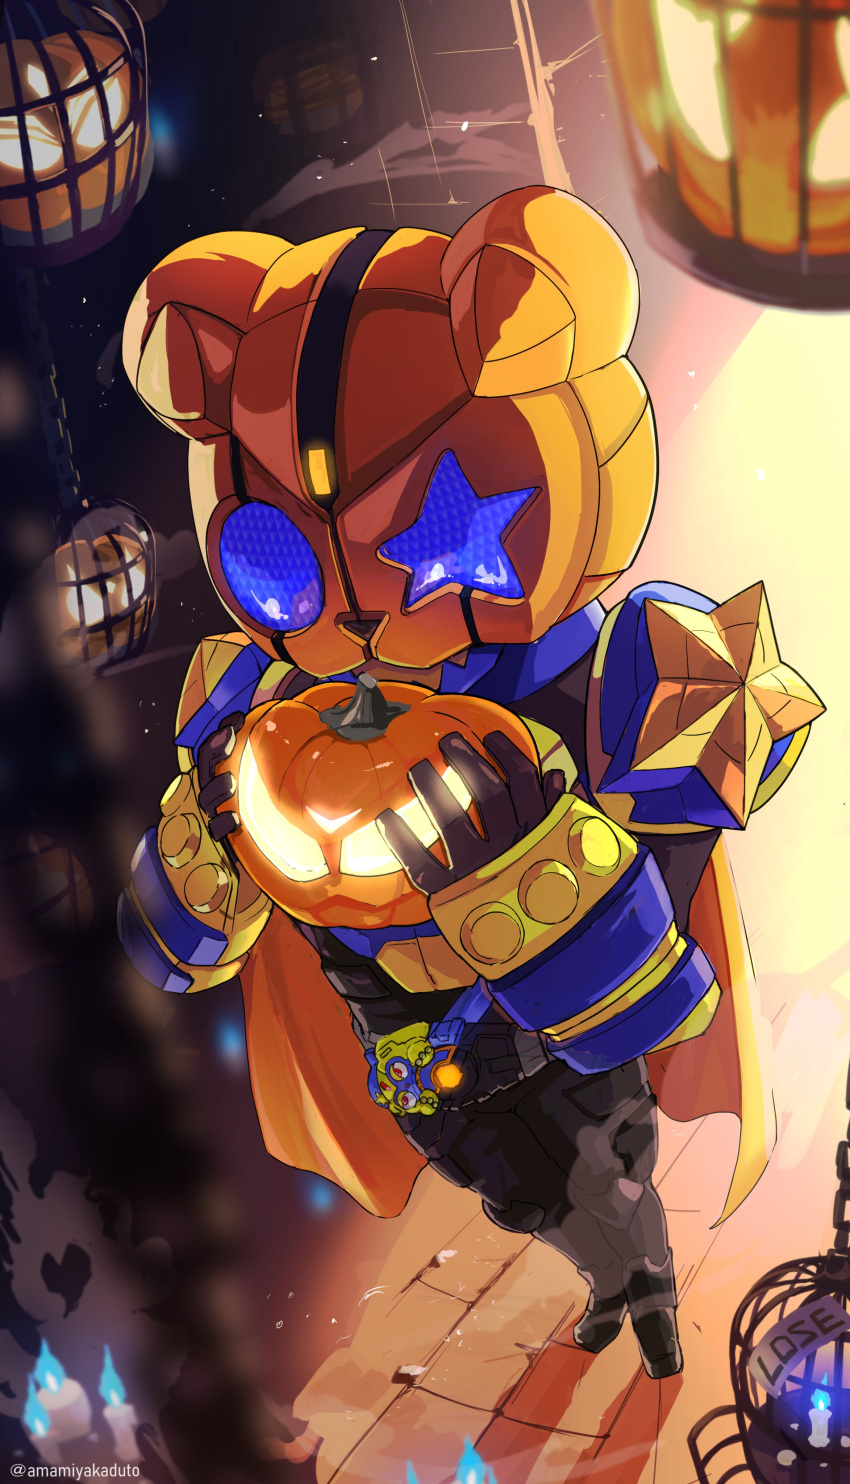 1boy absurdres amamiyakaduto bear blue_armor blue_eyes blue_fire brass_knuckles cage candle cape desire_driver dungeon fire foreshortening glowing glowing_eyes highres jack-o'-lantern kamen_rider kamen_rider_buffa kamen_rider_geats_(series) kamen_rider_na-go kamen_rider_punkjack kamen_rider_tycoon male_focus monster monster_buckle orange_cape pumpkin raise_buckle shadow twitter_username villain_pose weapon